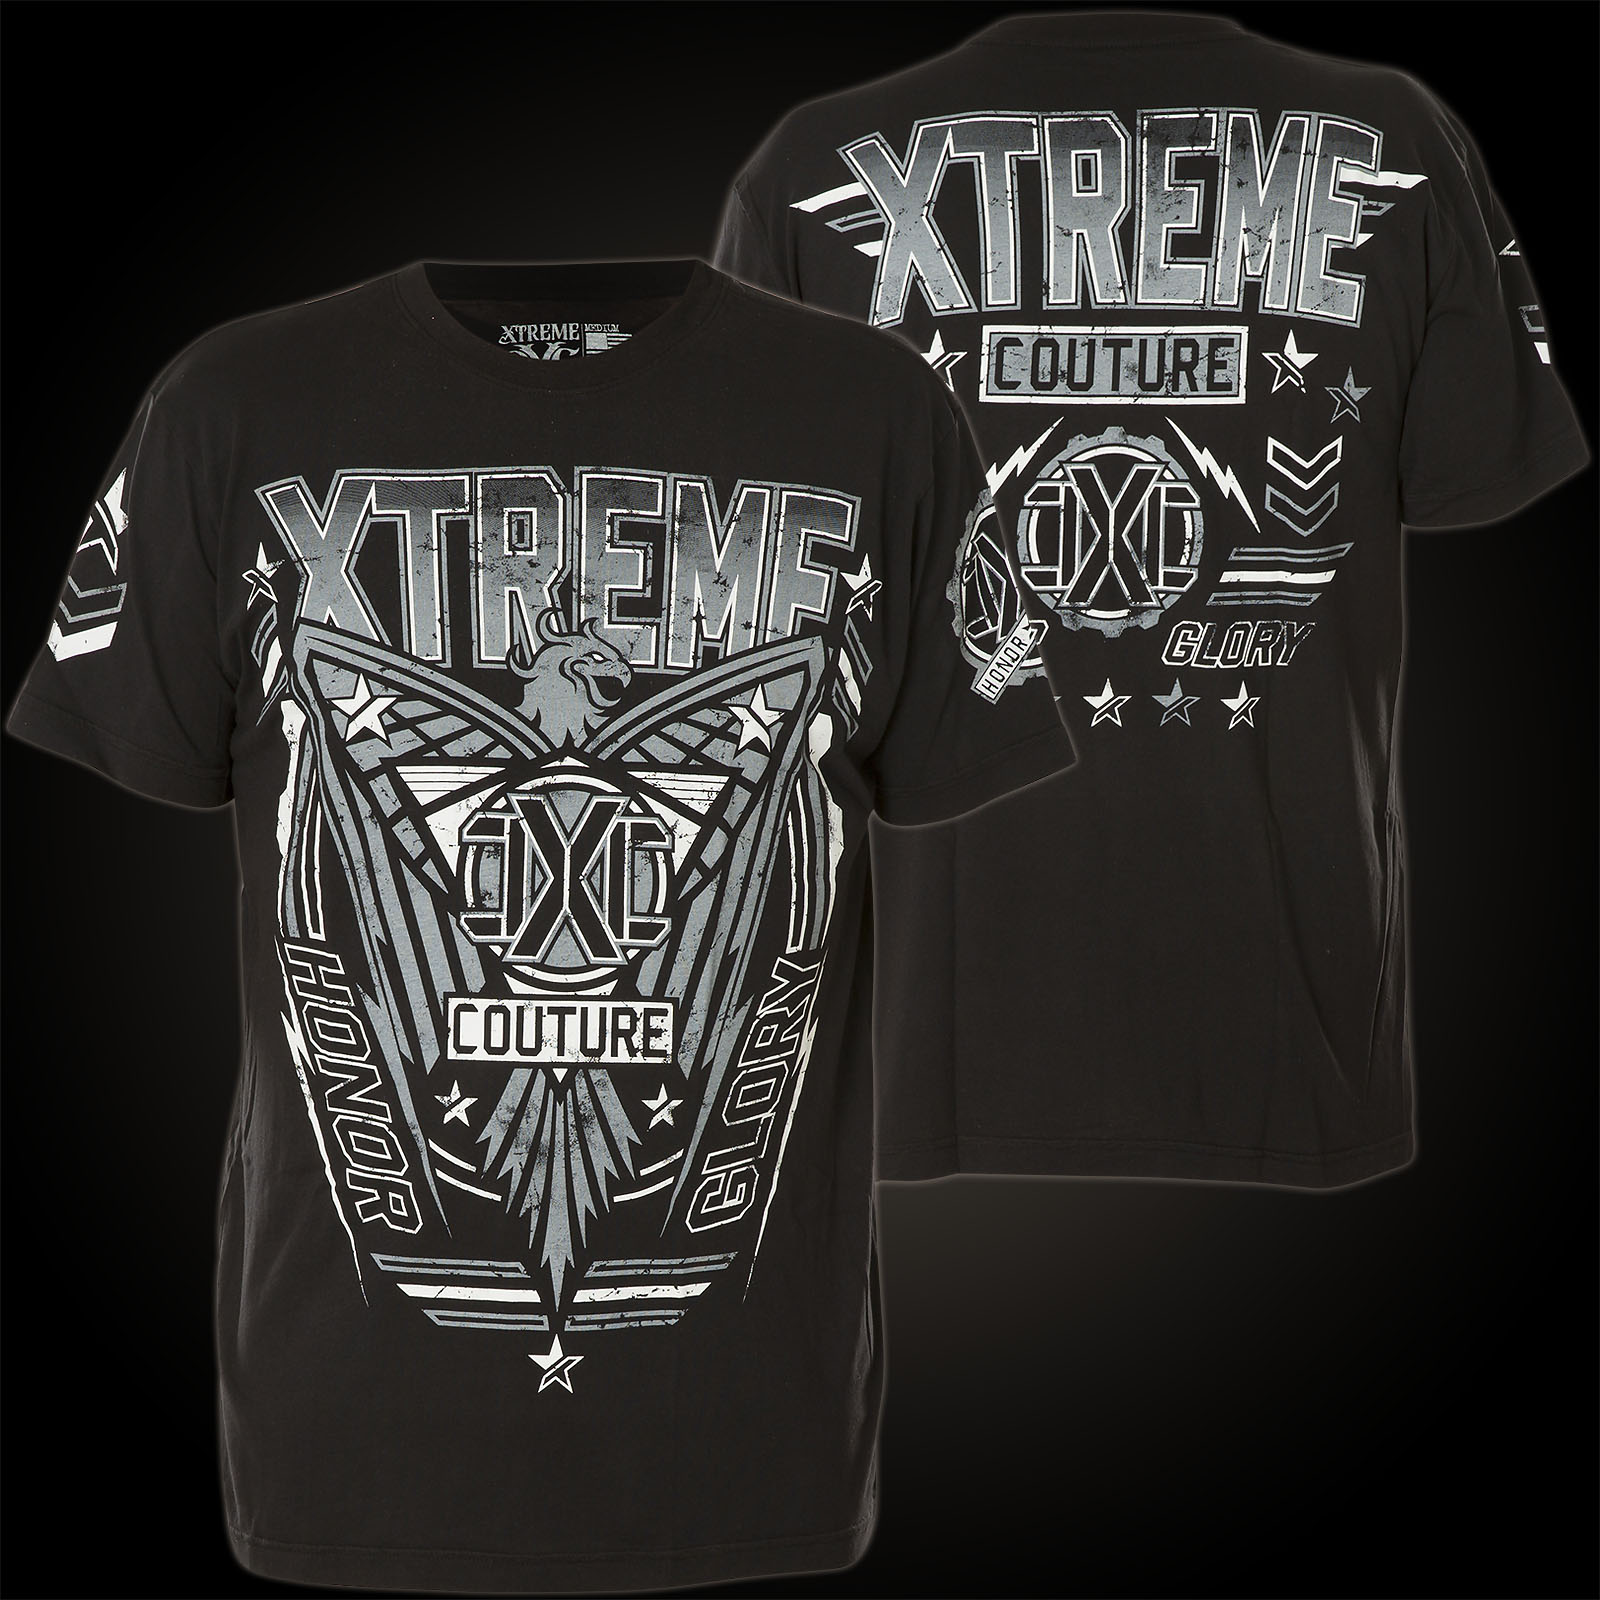 Xtreme Couture T- Shirt Acclimate with a large XC crest